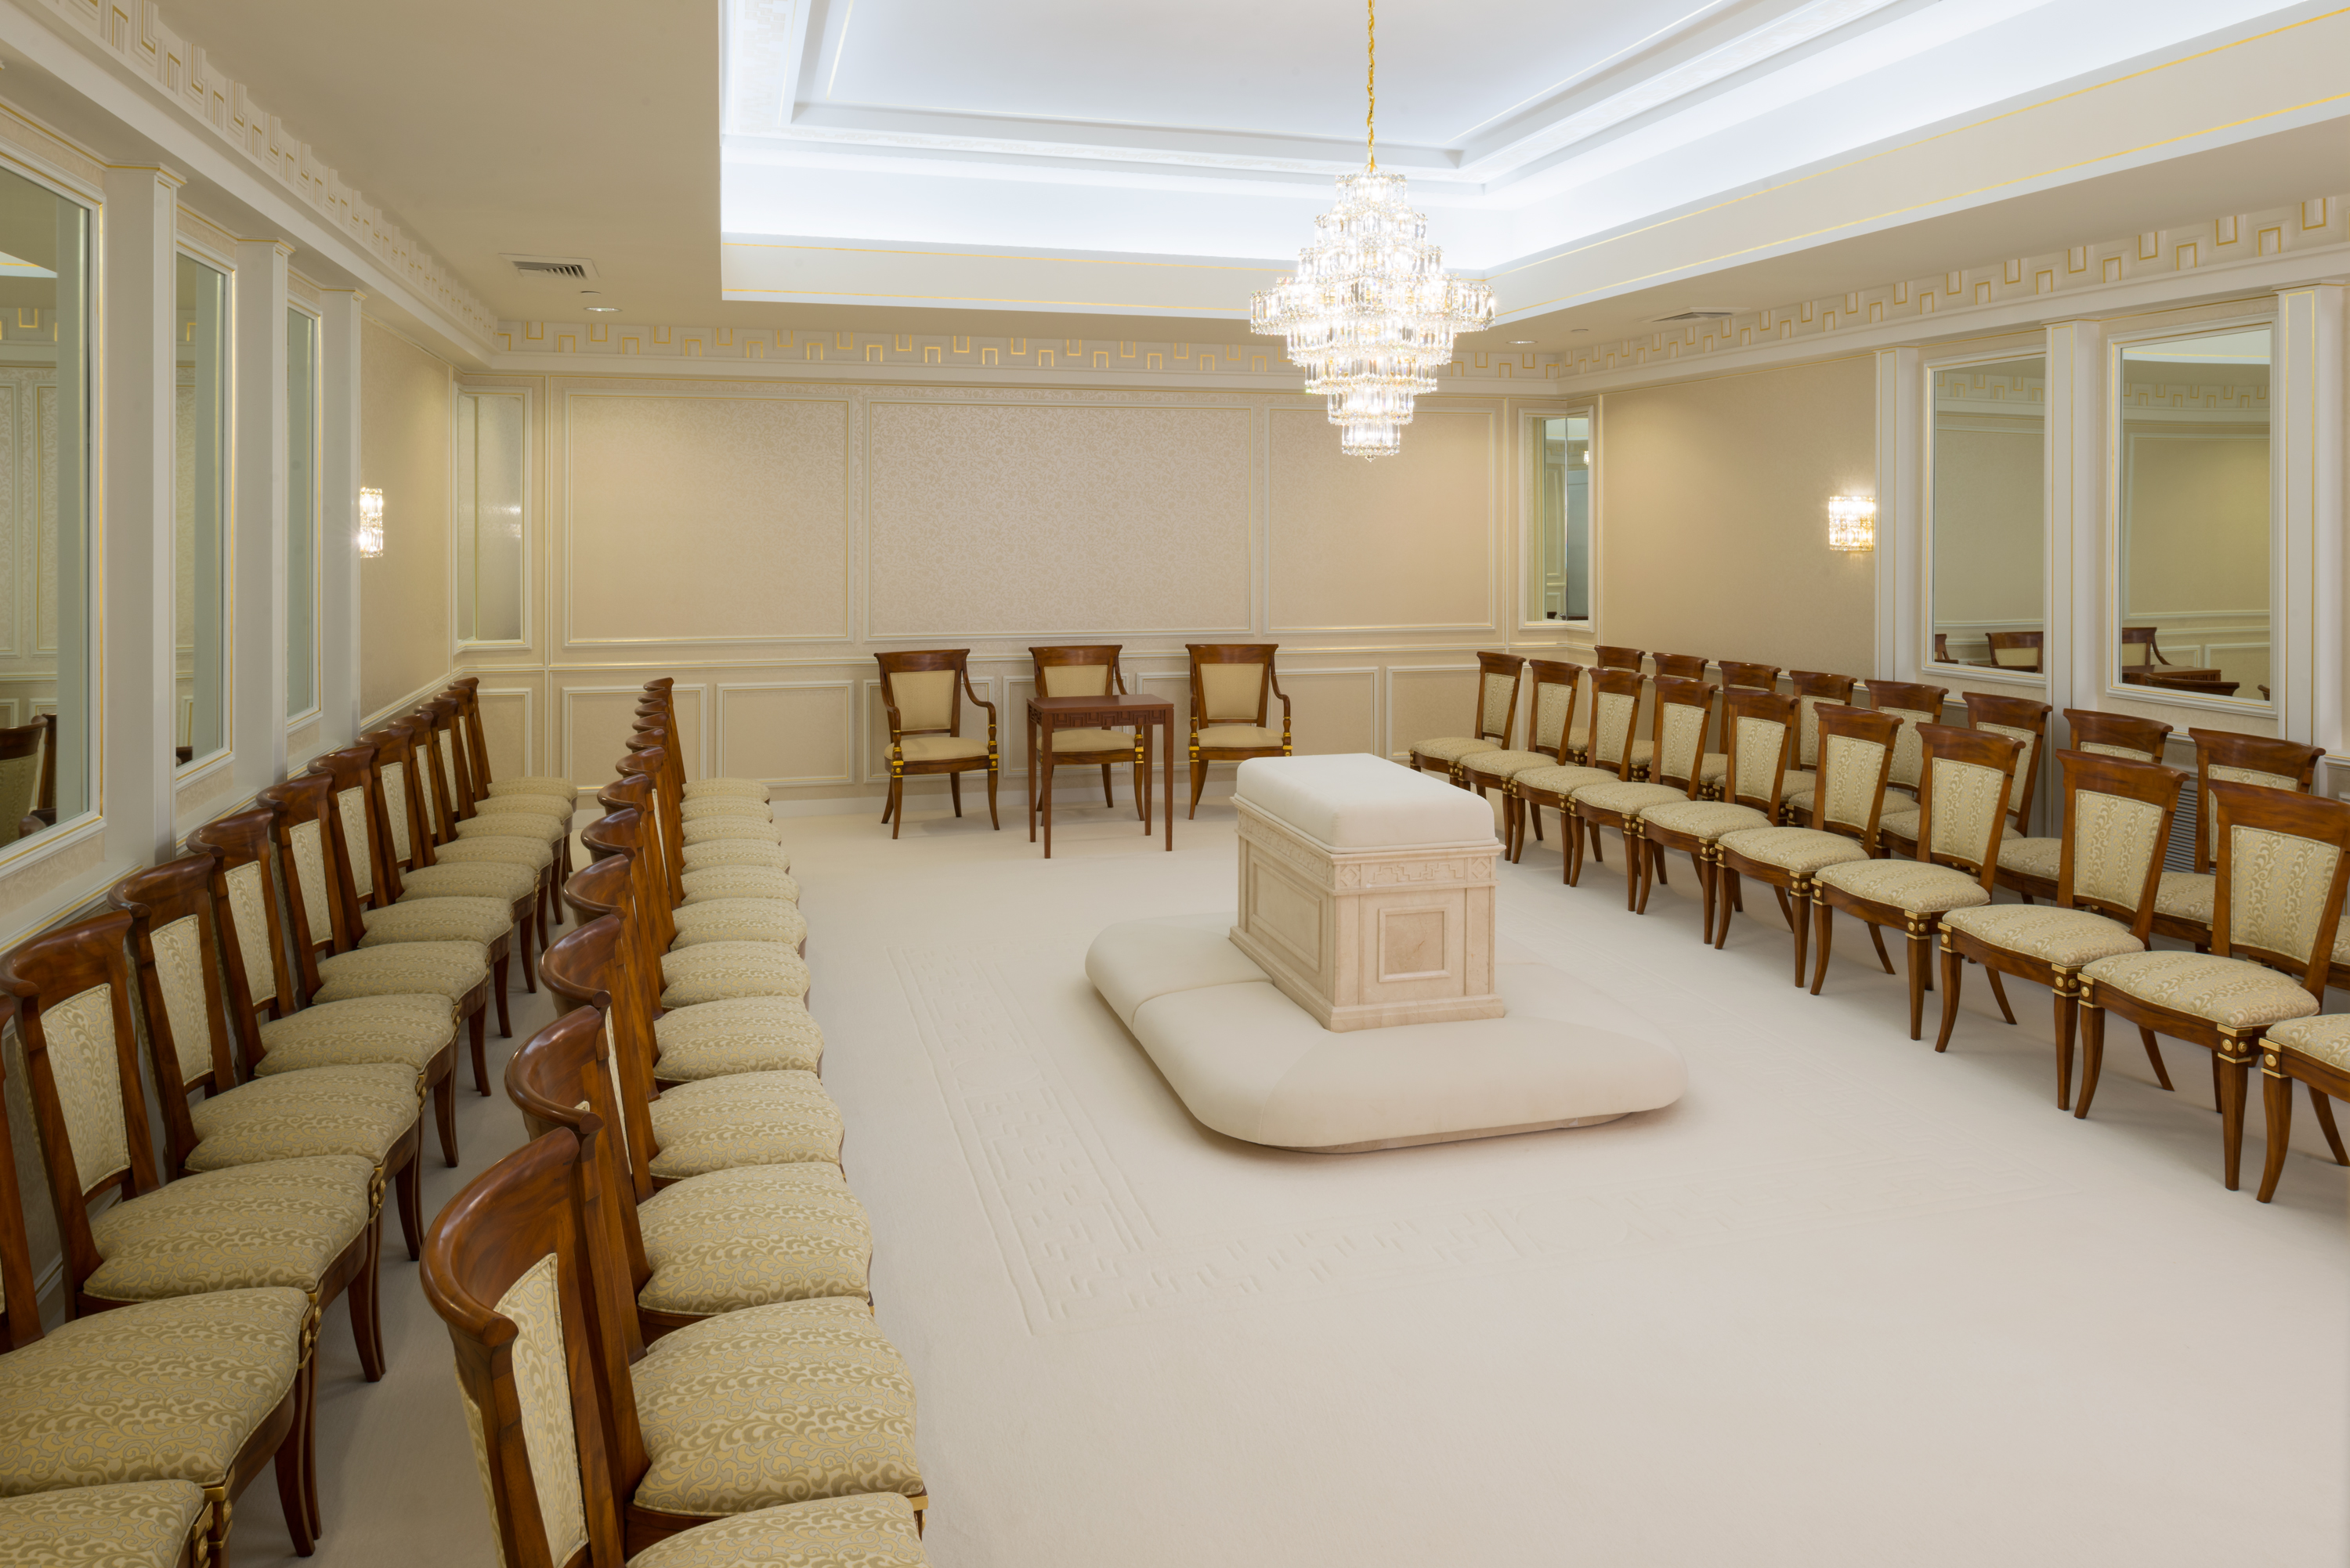 Two rows of chairs on both sides of the room facing a white altar in the center, with mirrors on two opposite walls.